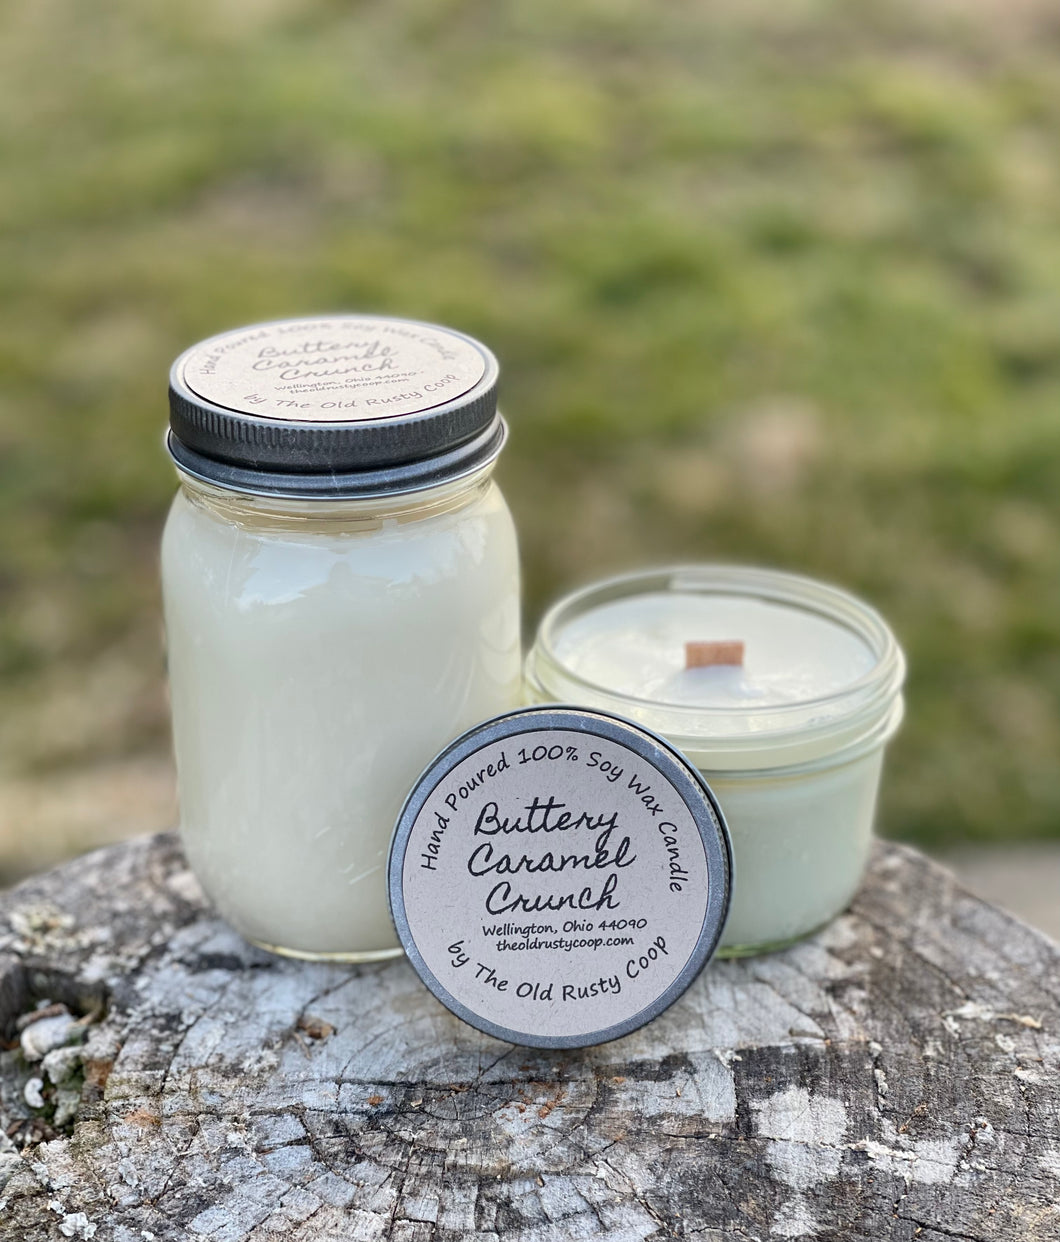 Buttery Caramel Crunch ~ Hand Poured 100% Soy Wax Wooden Wick Candles